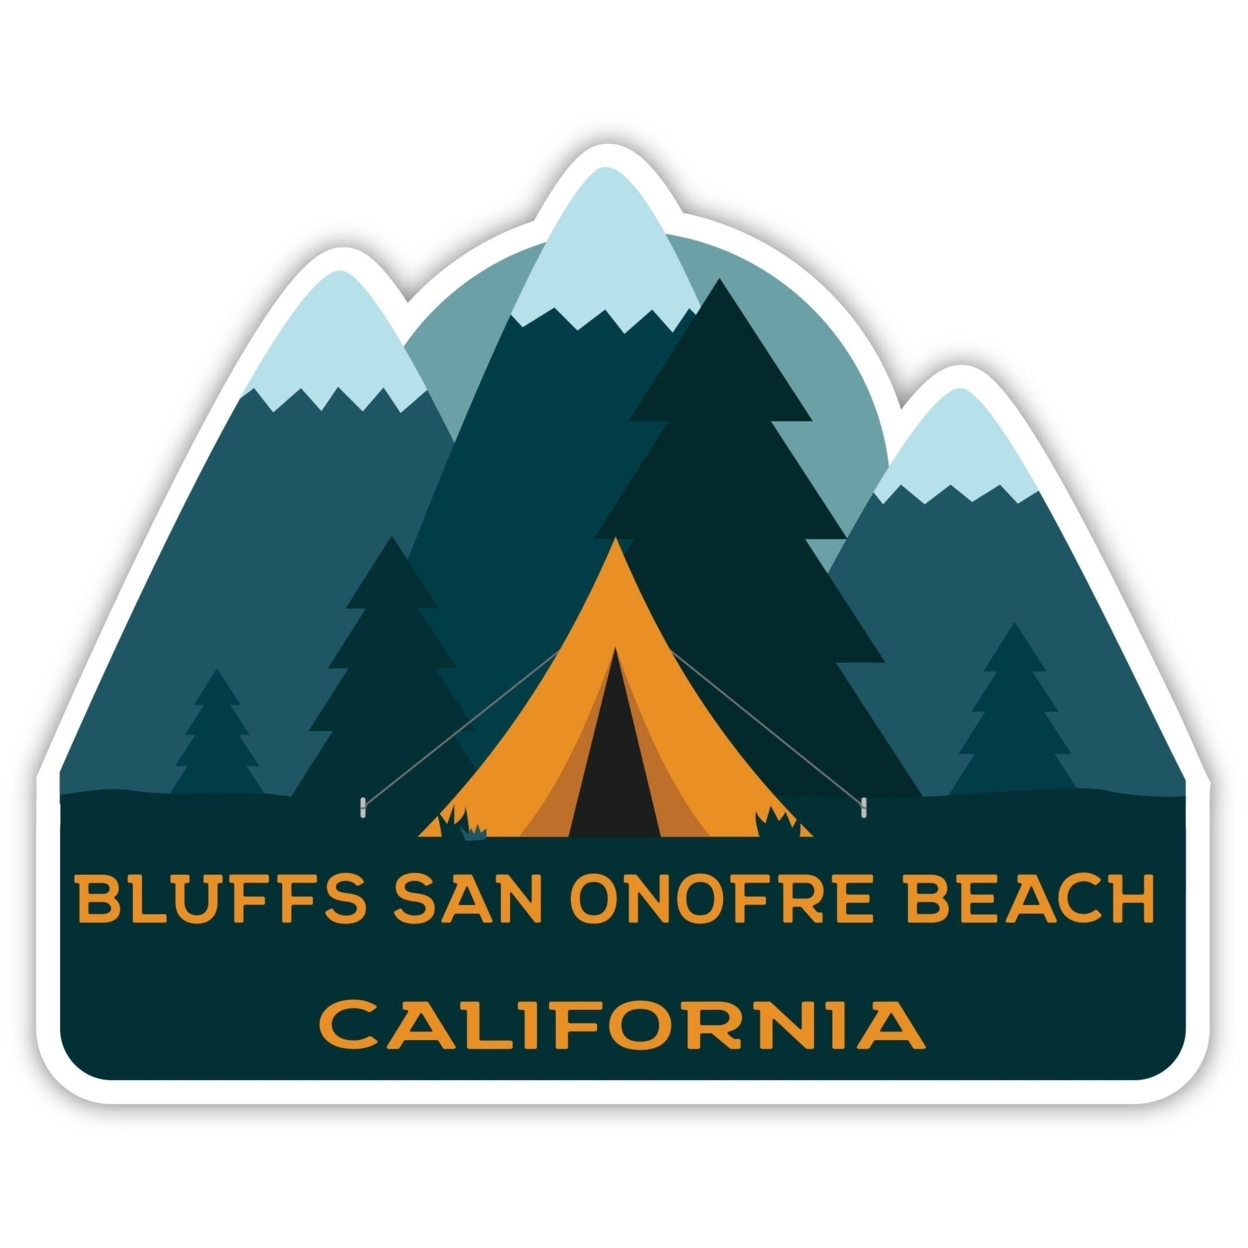 Bluffs San Onofre Beach California Souvenir Decorative Stickers (Choose Theme And Size) - 4-Pack, 6-Inch, Tent